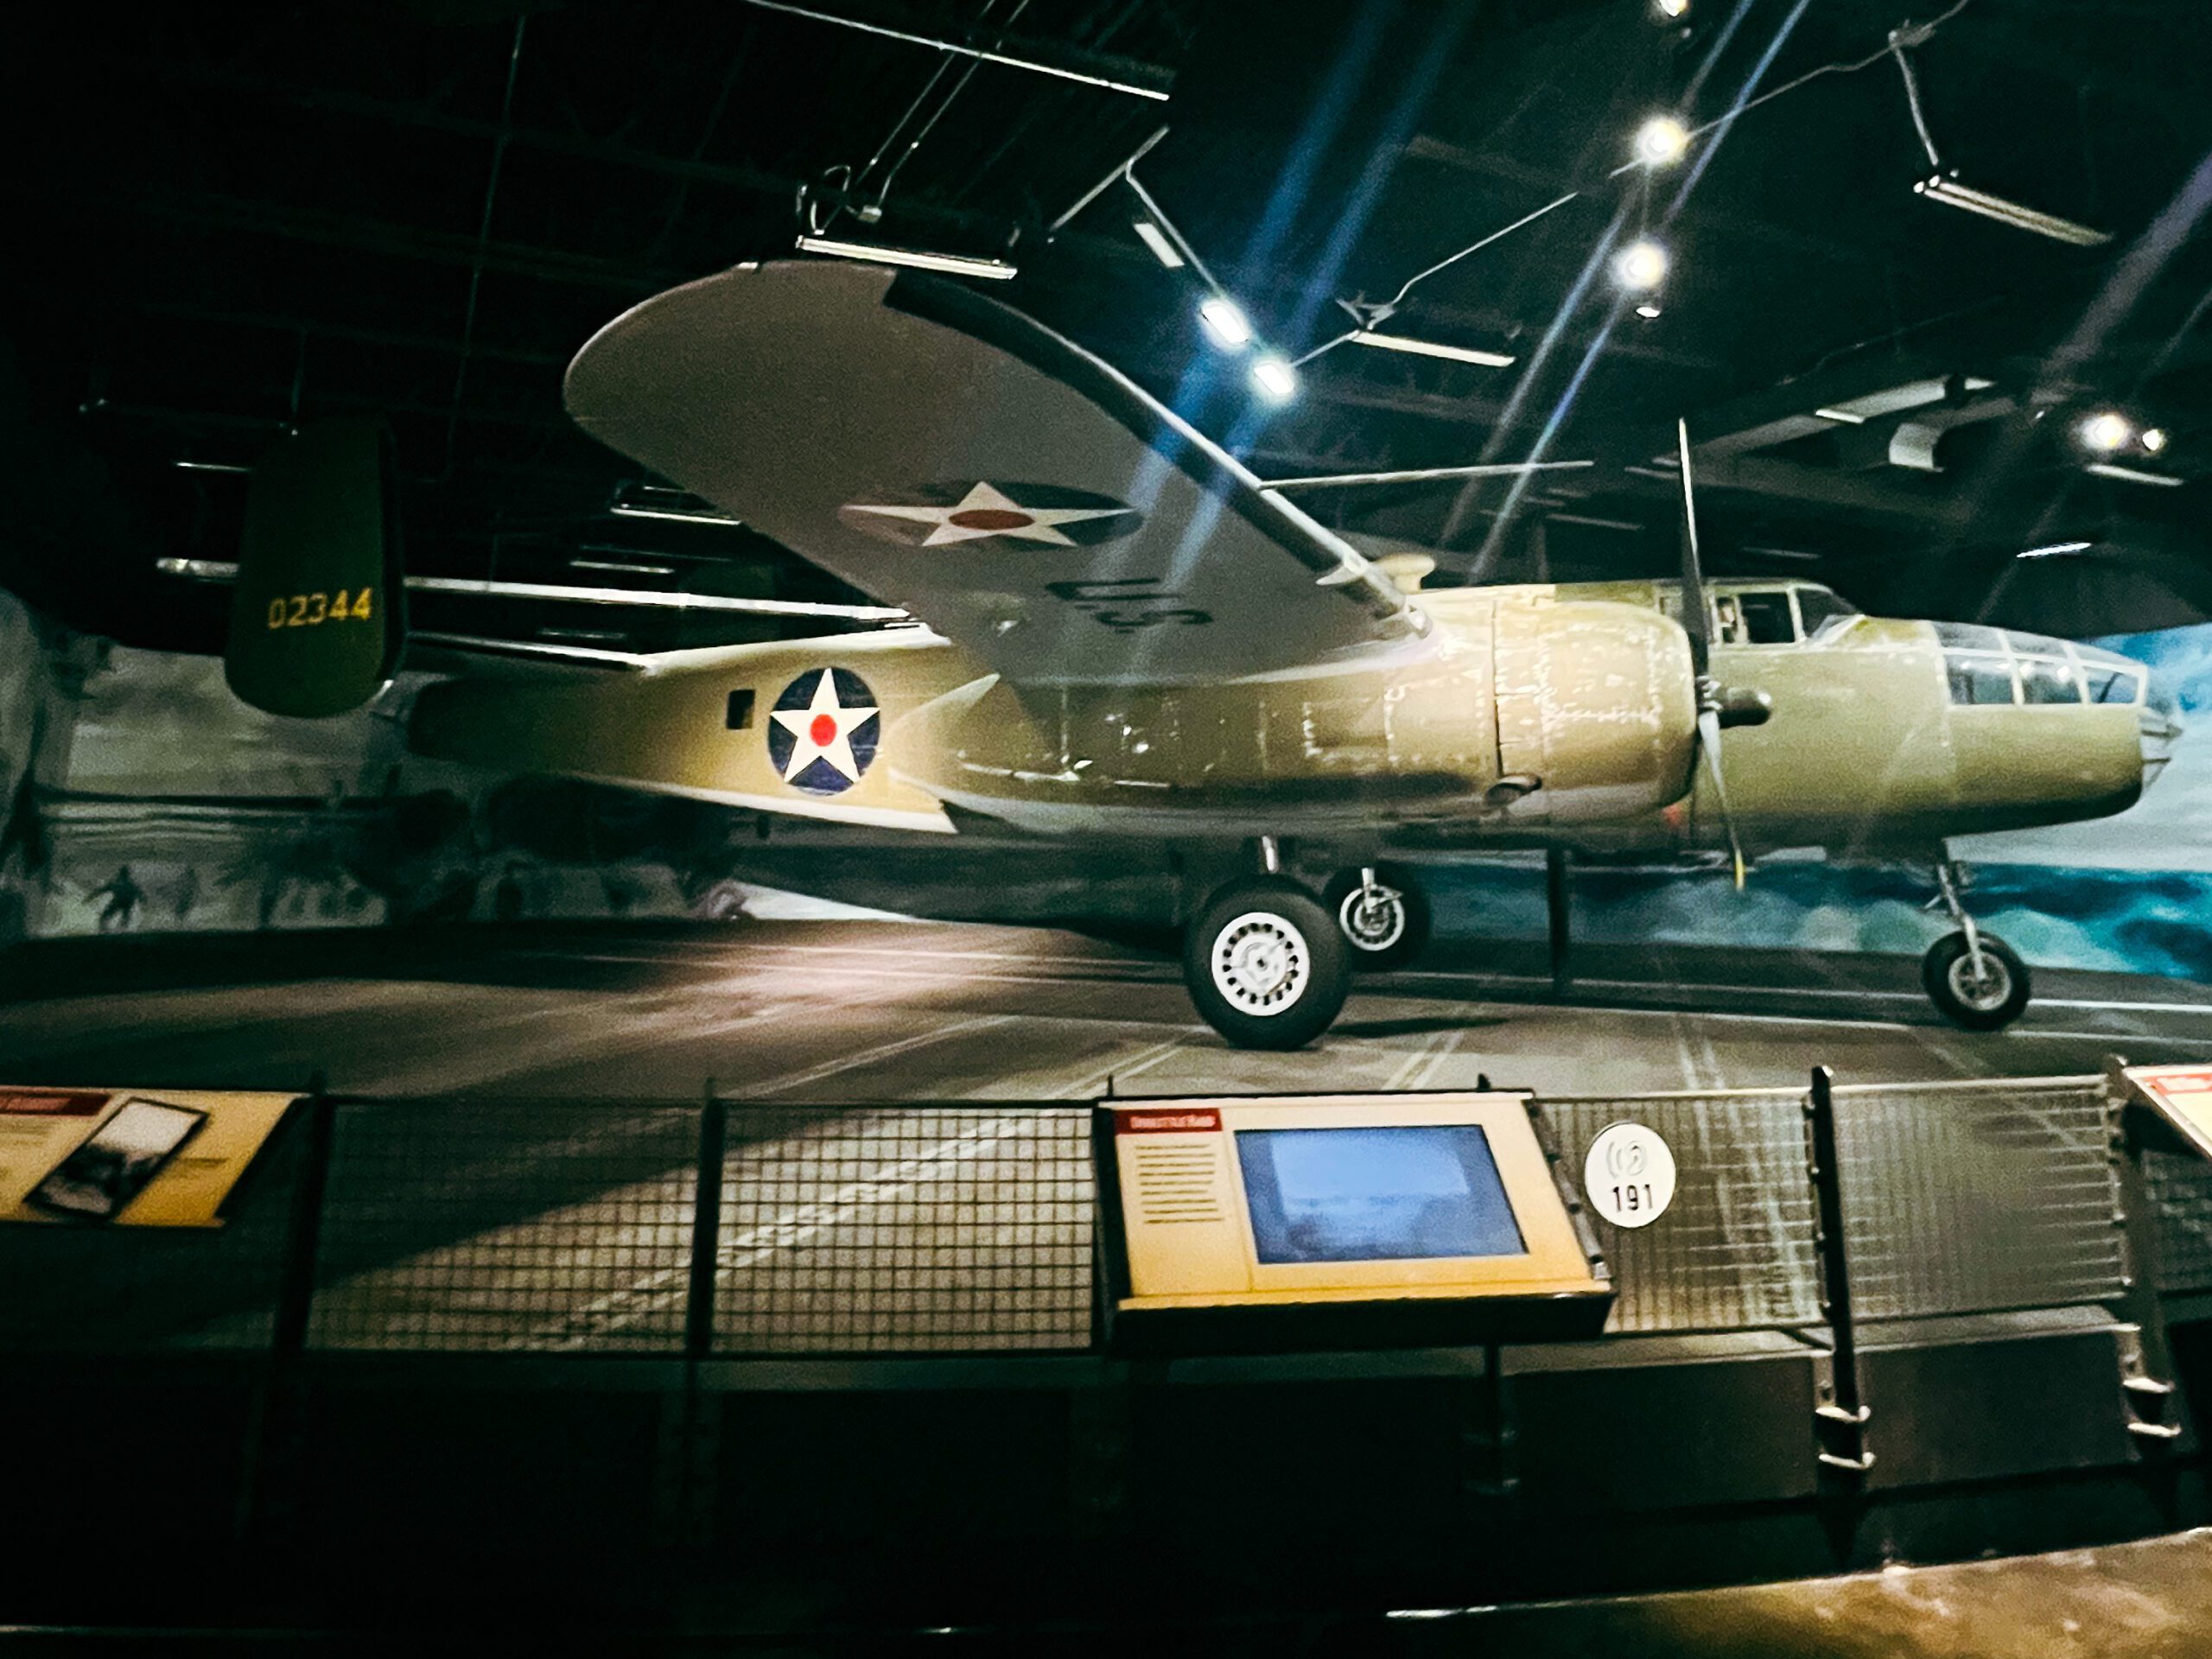 WWII bomber on display in a museum